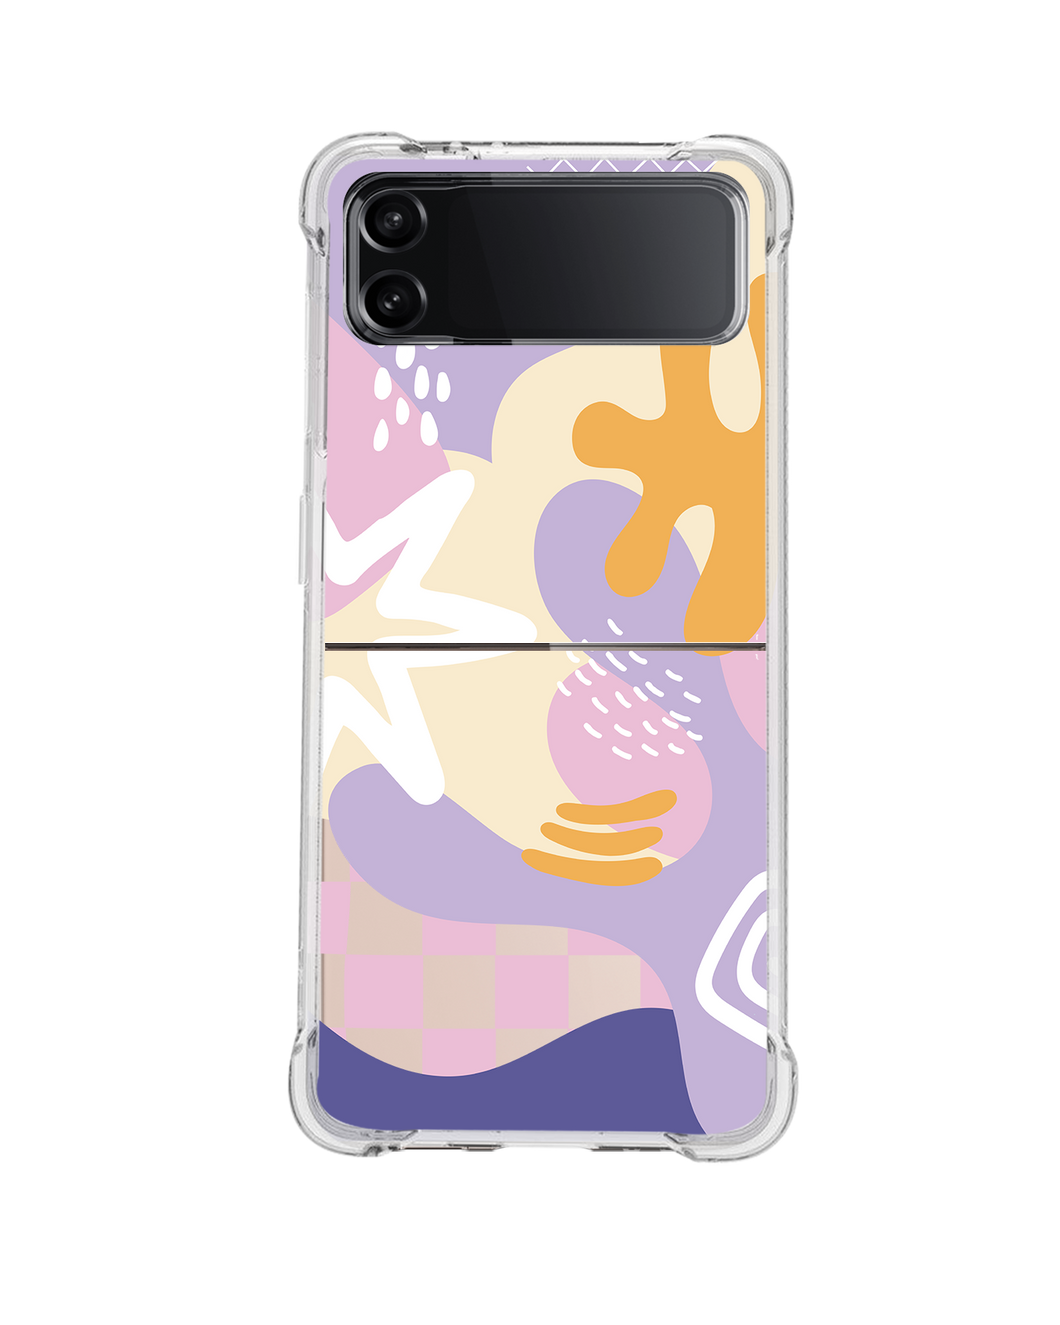 Android Flip / Fold Case - Abstract Flower 4.0